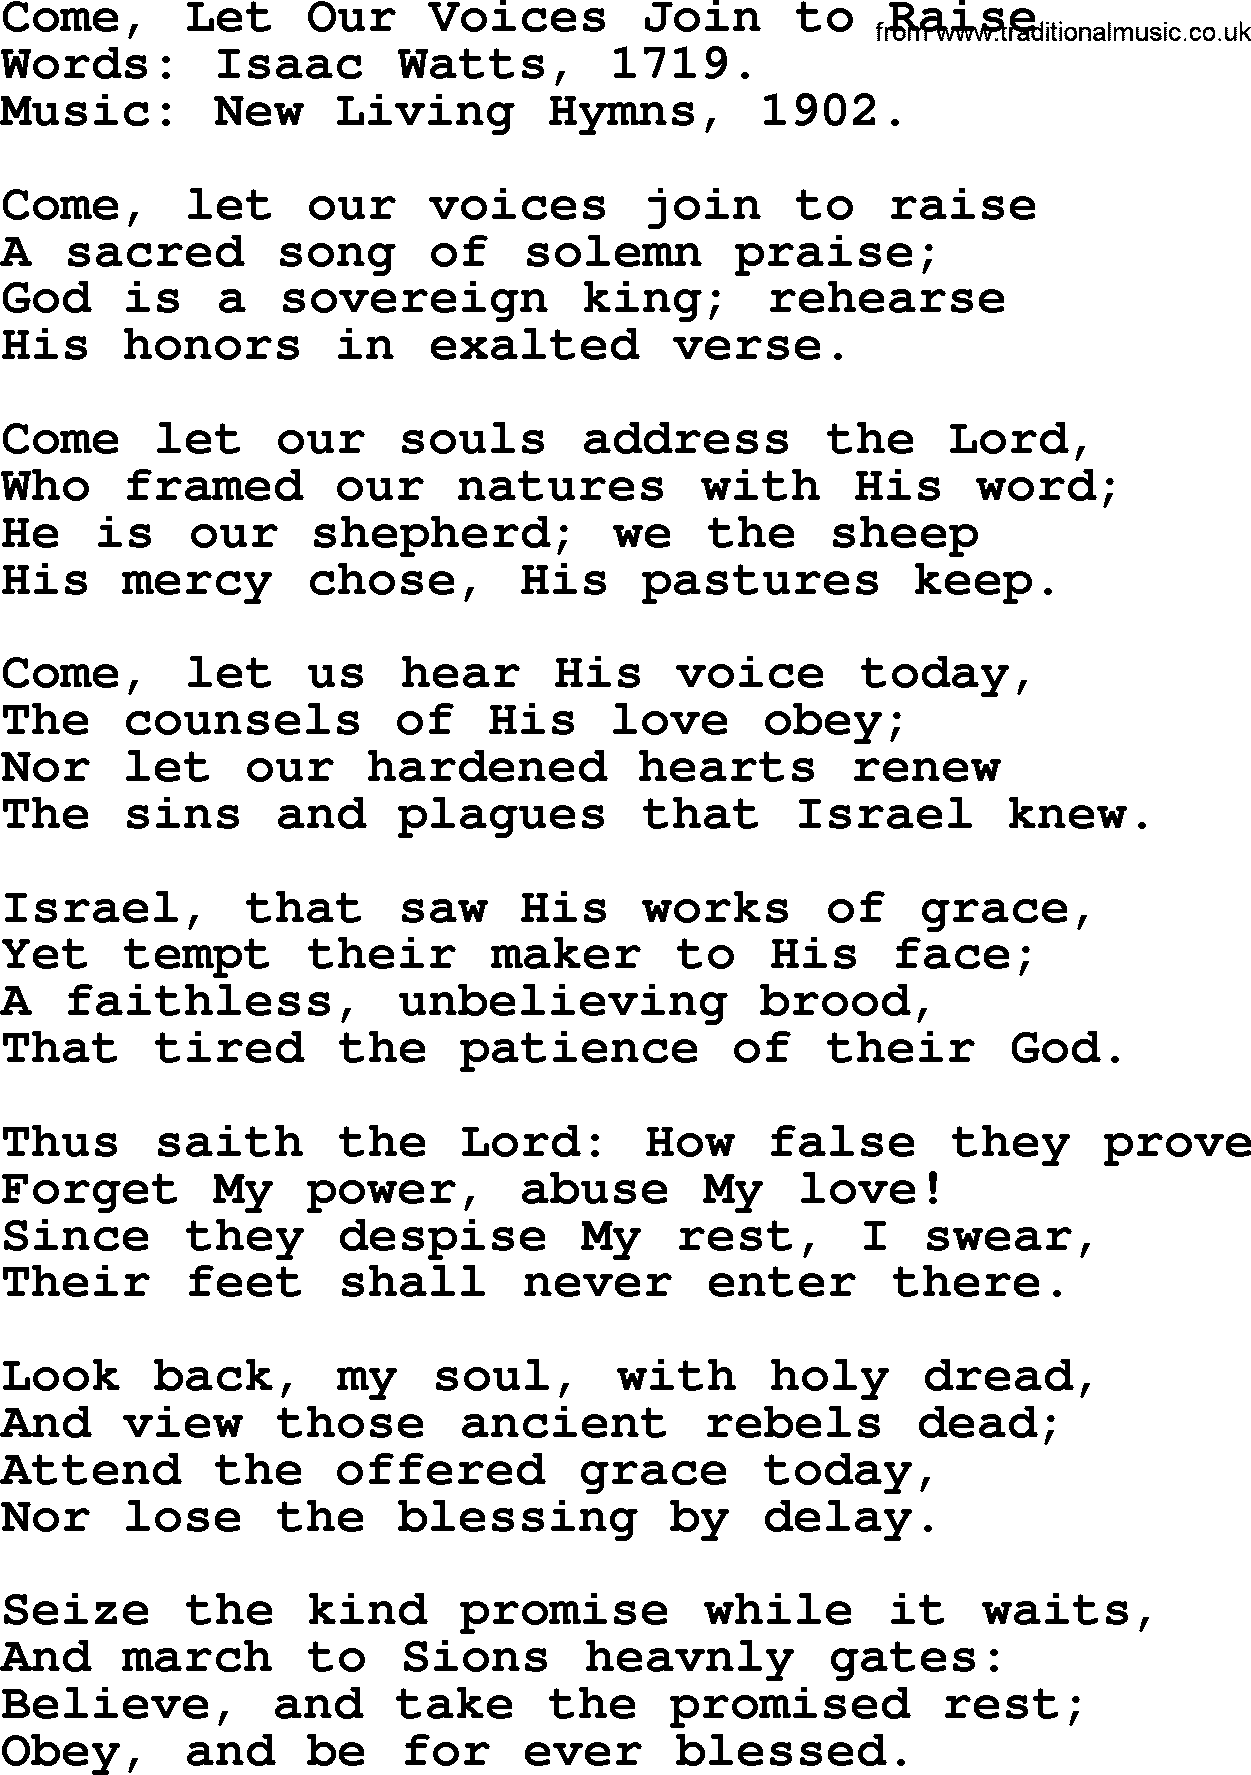 Isaac Watts Christian hymn: Come, Let Our Voices Join to Raise- lyricss